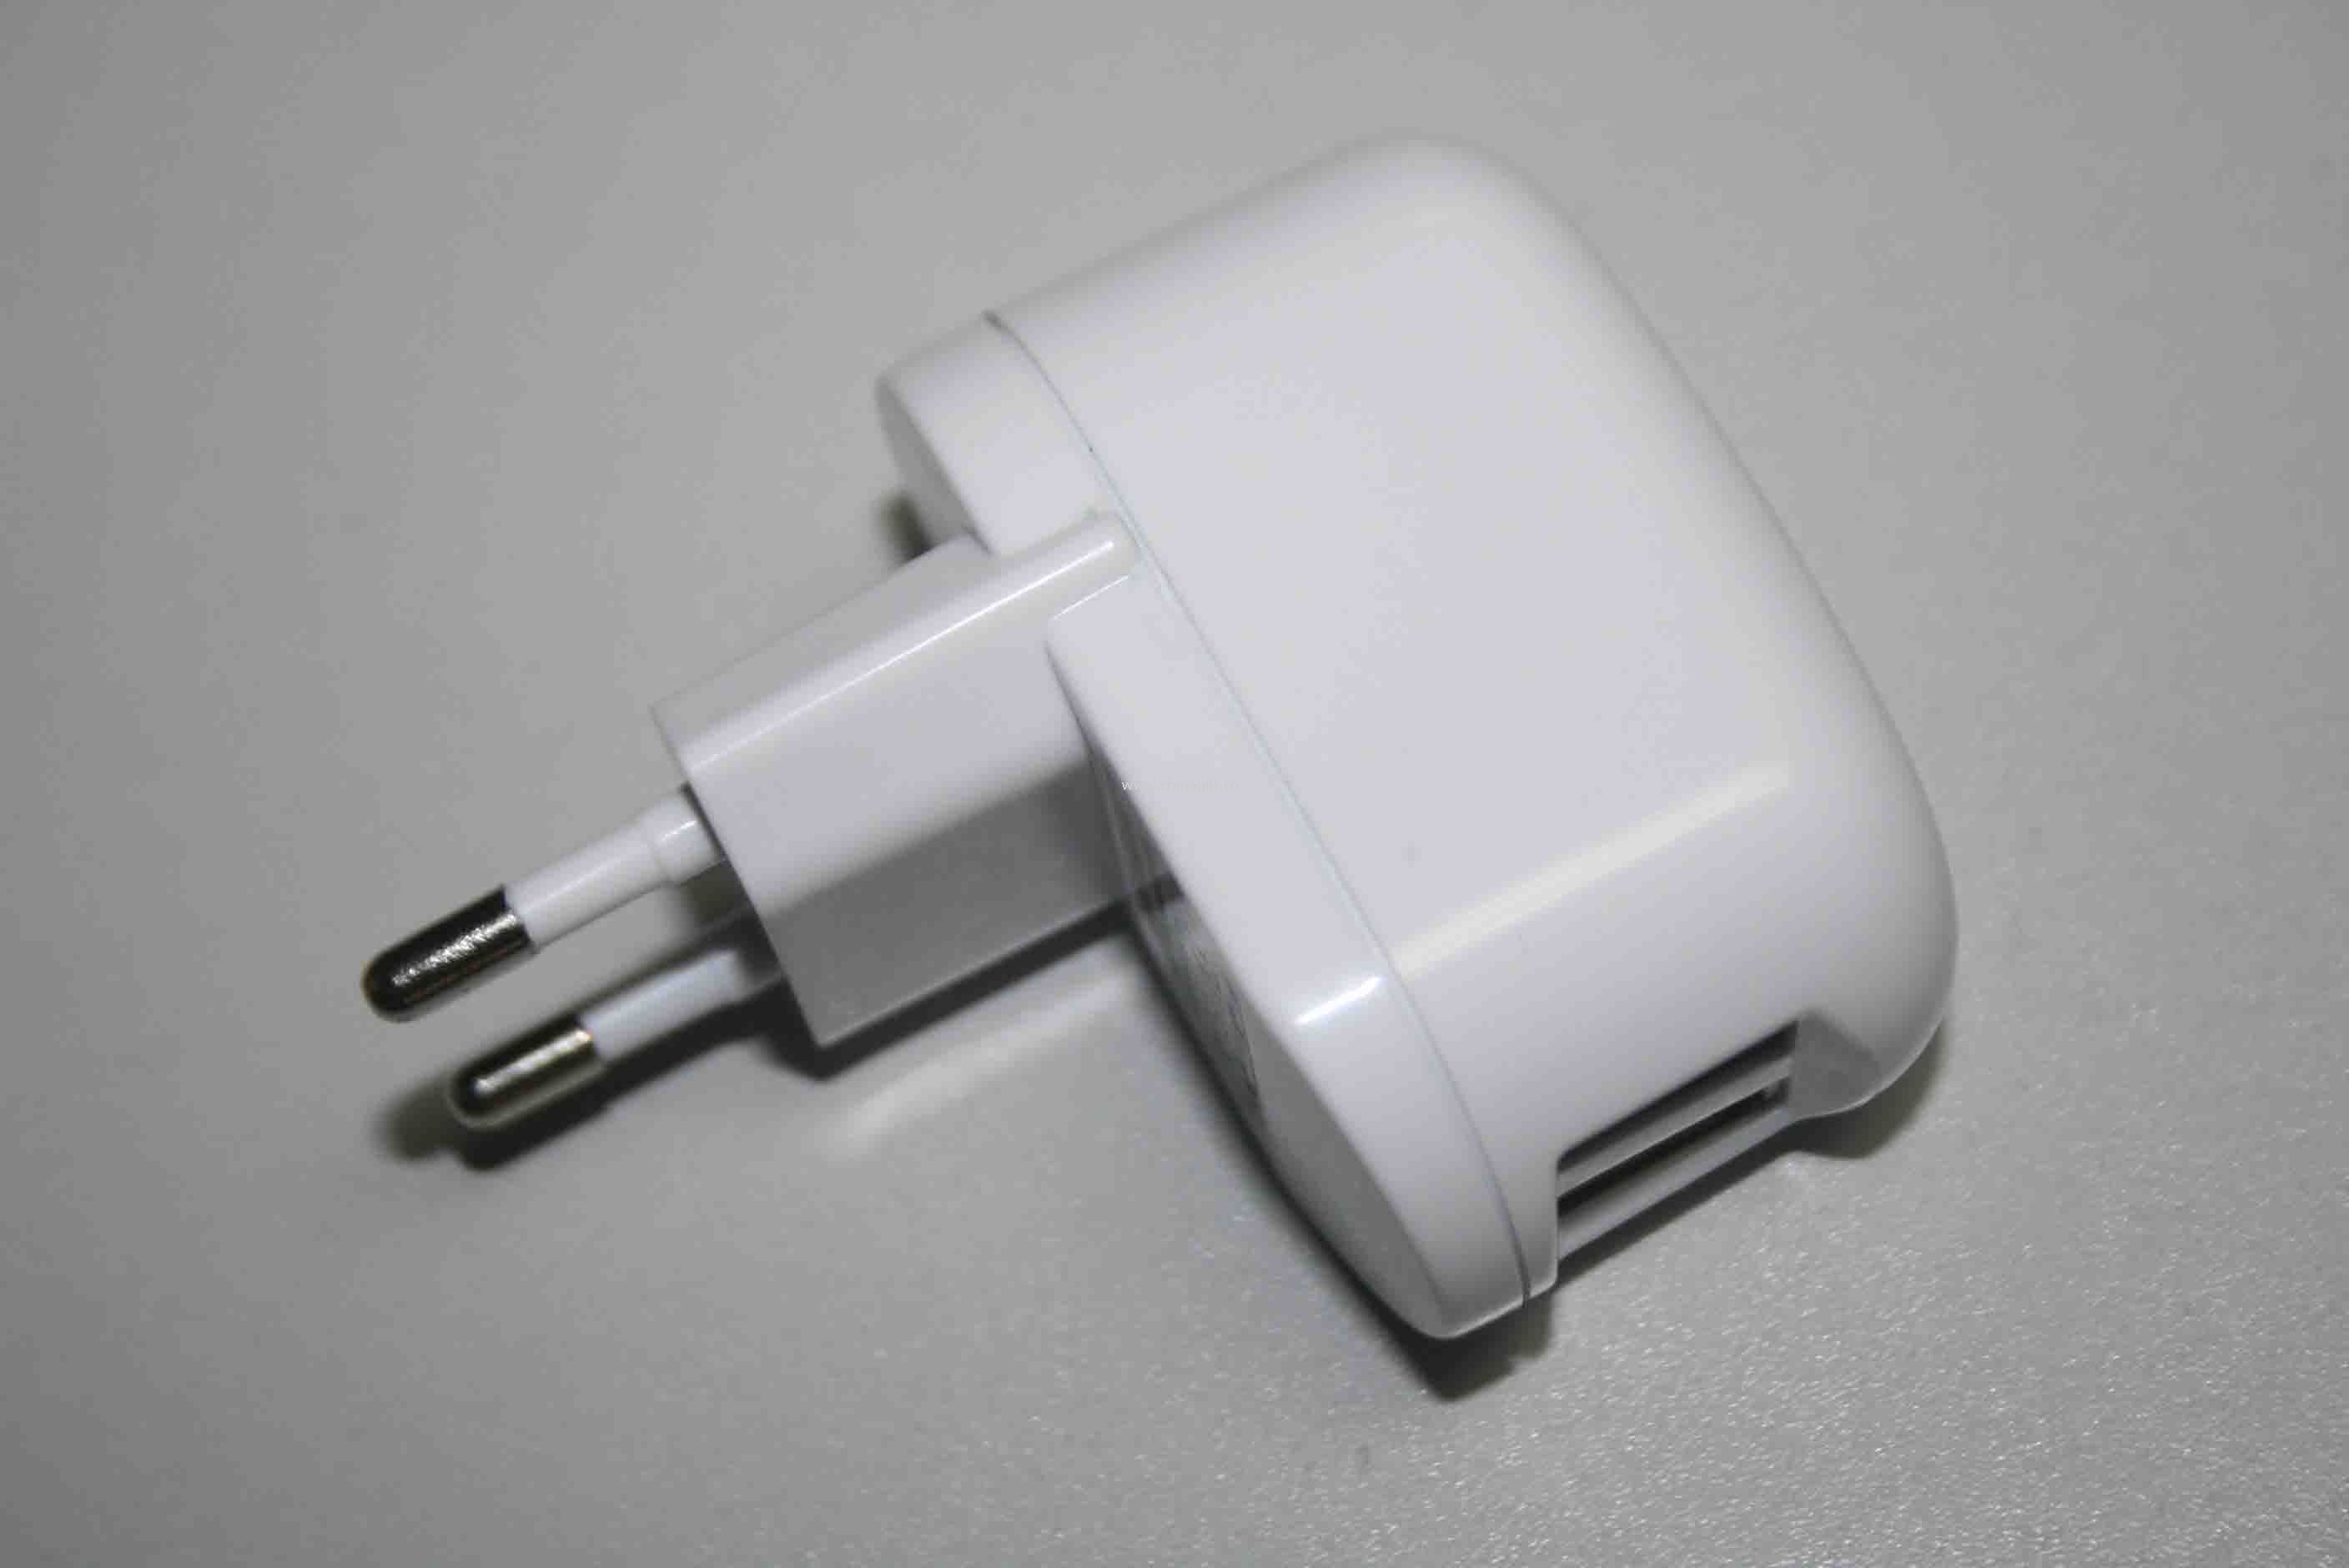 Dual USB Wall Charger for iPod/iPhone